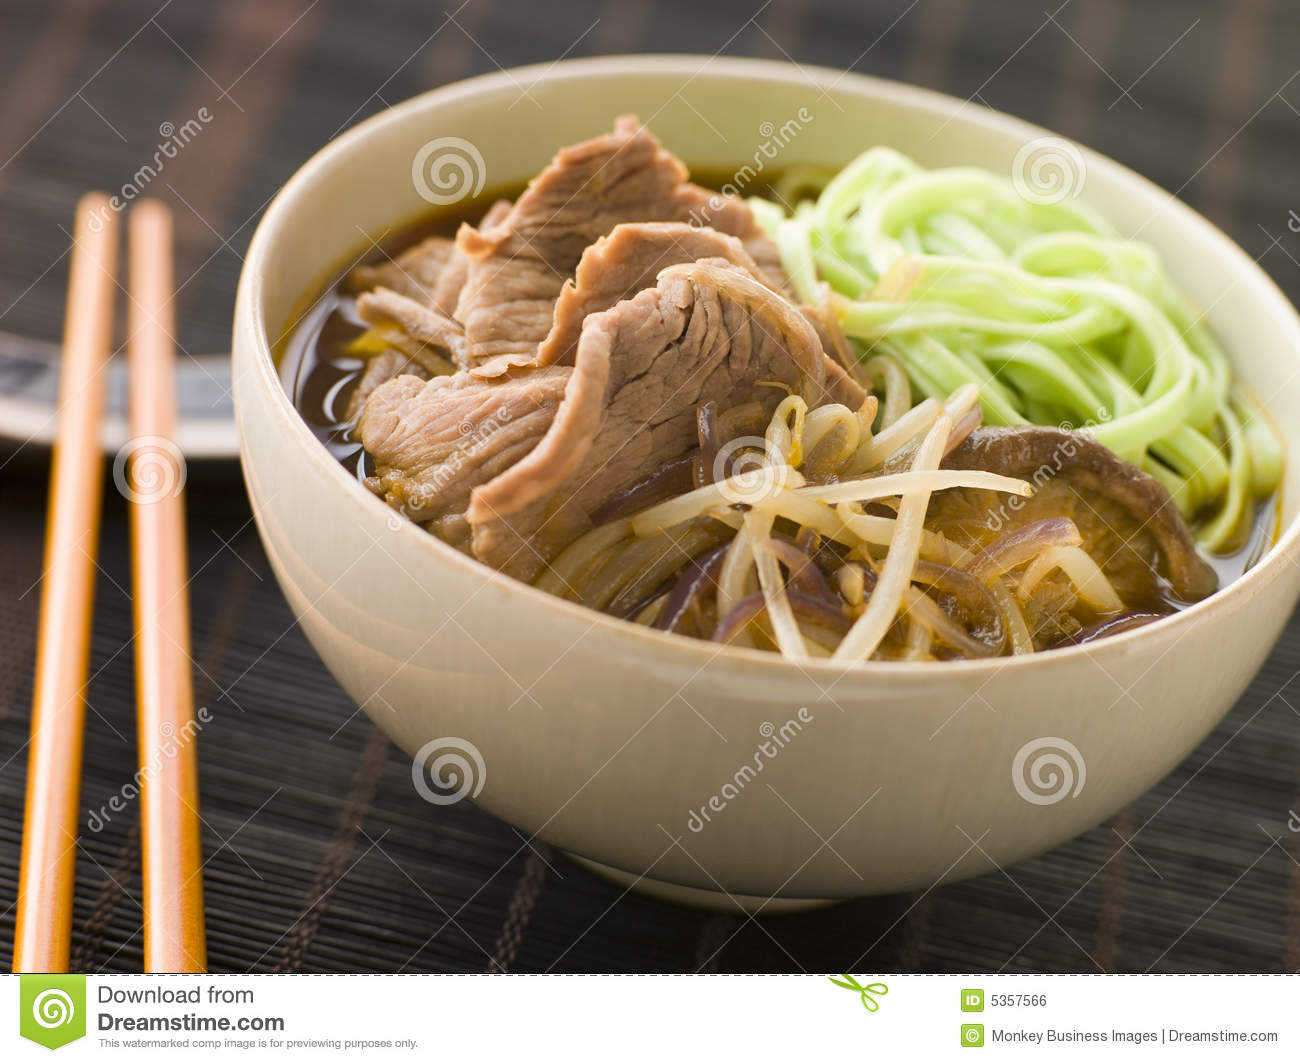 Hot And Sour Beef Broth With Spinach Ramen Noodles Royalty Free Stock